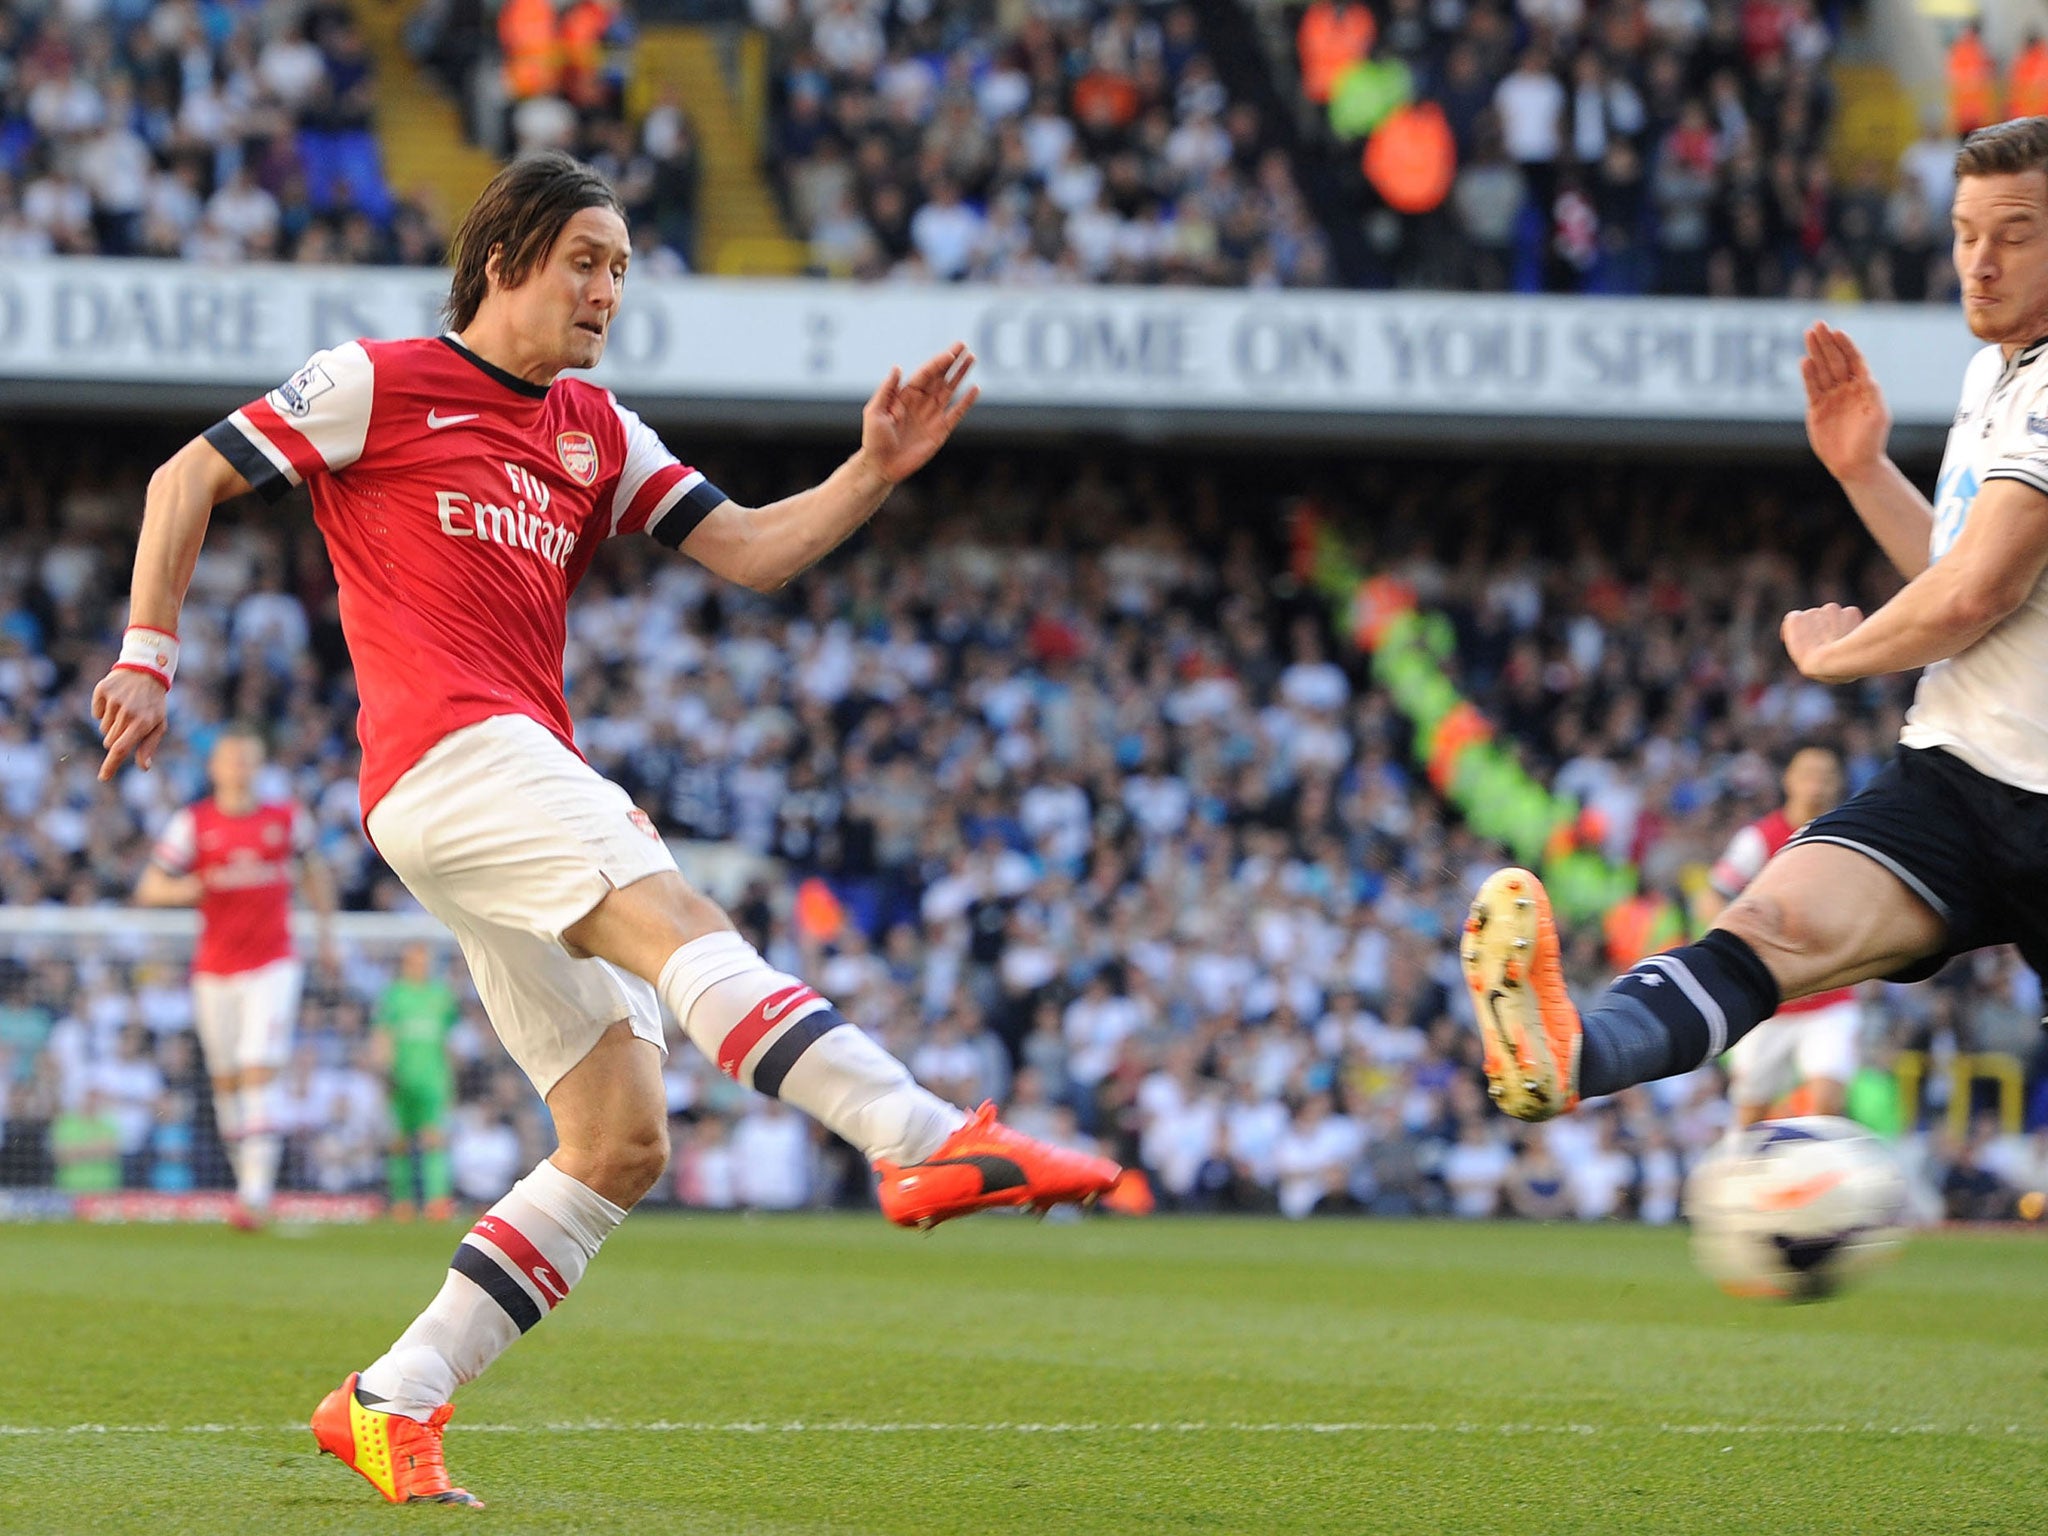 Tomas Rosicky put the Gunners ahead in the second minute against Tottenham with a rocket of a strike